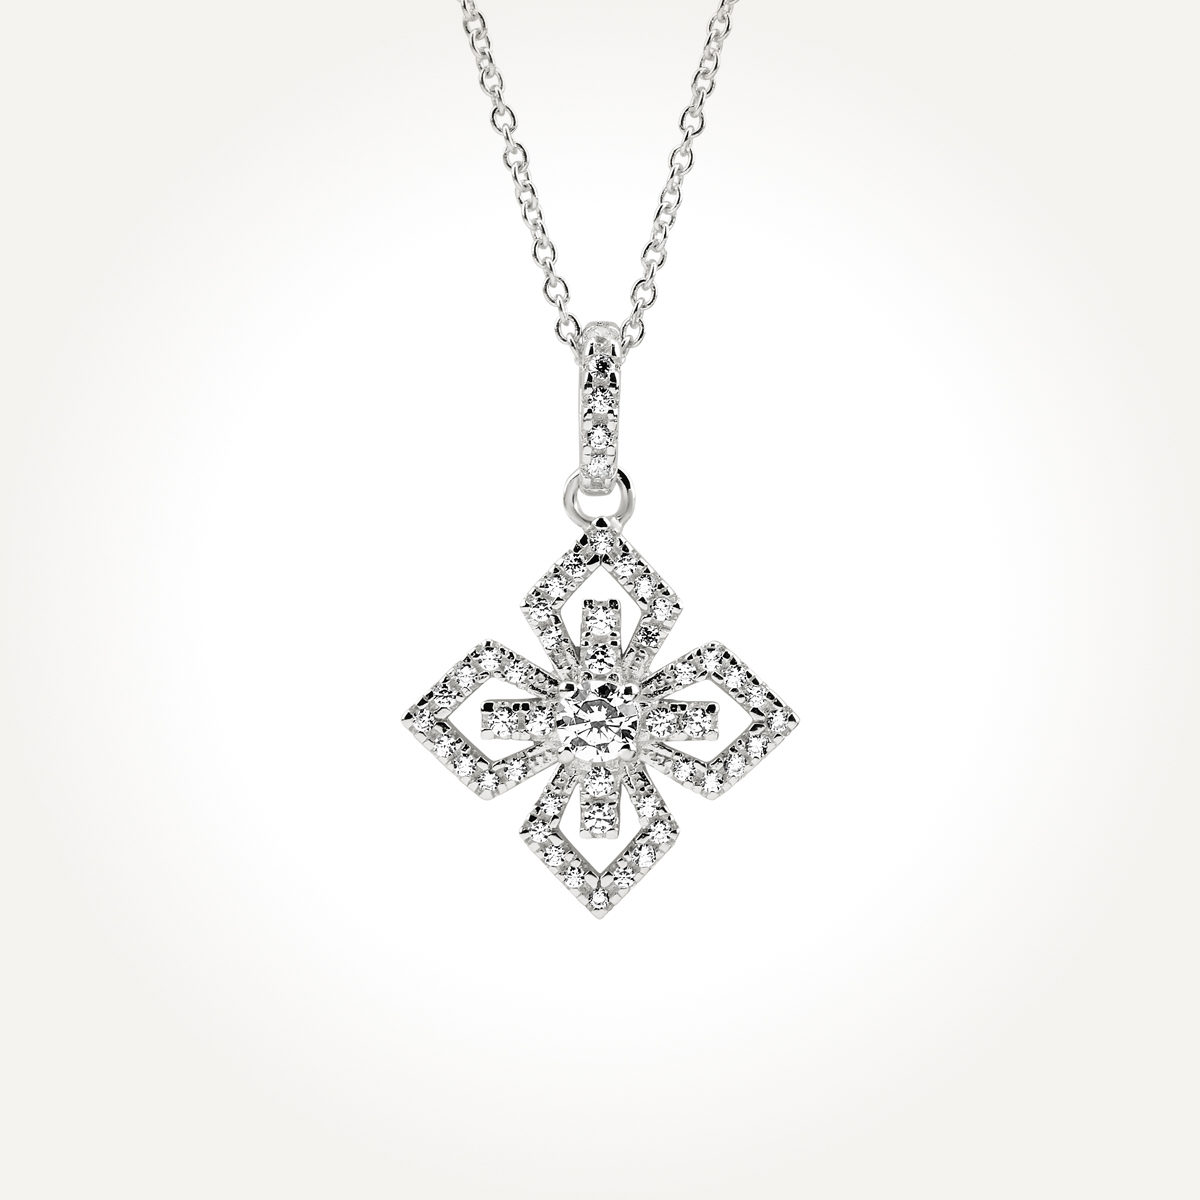 14KT White Gold Floral Cross Necklace 0.43 CT. T.W. $819.00